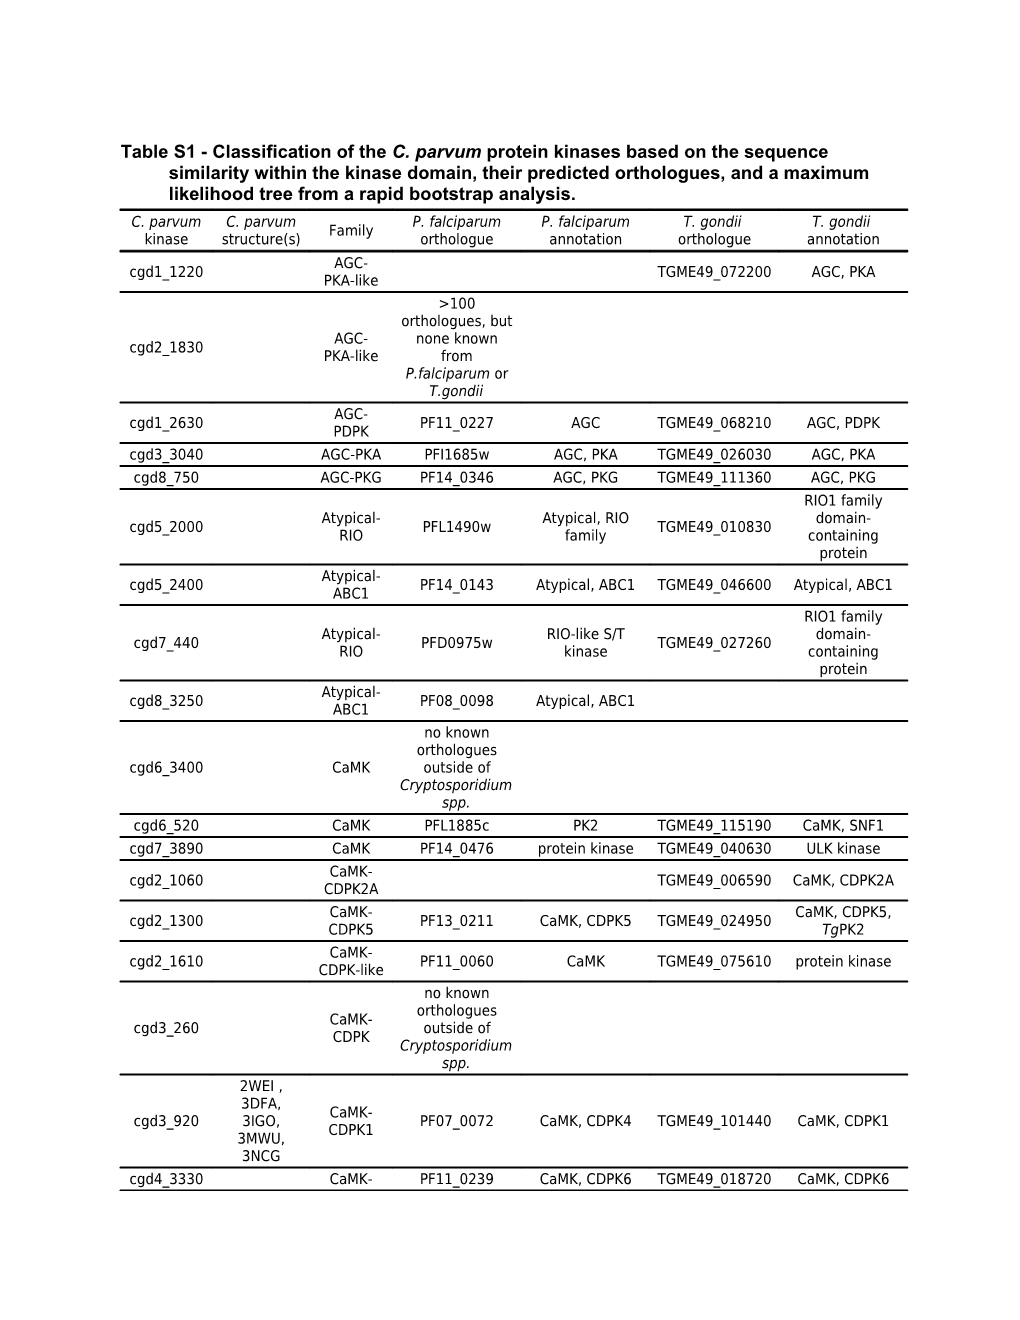 Table S1 - Classification of the C. Parvum Protein Kinases Based on the Sequence Similarity